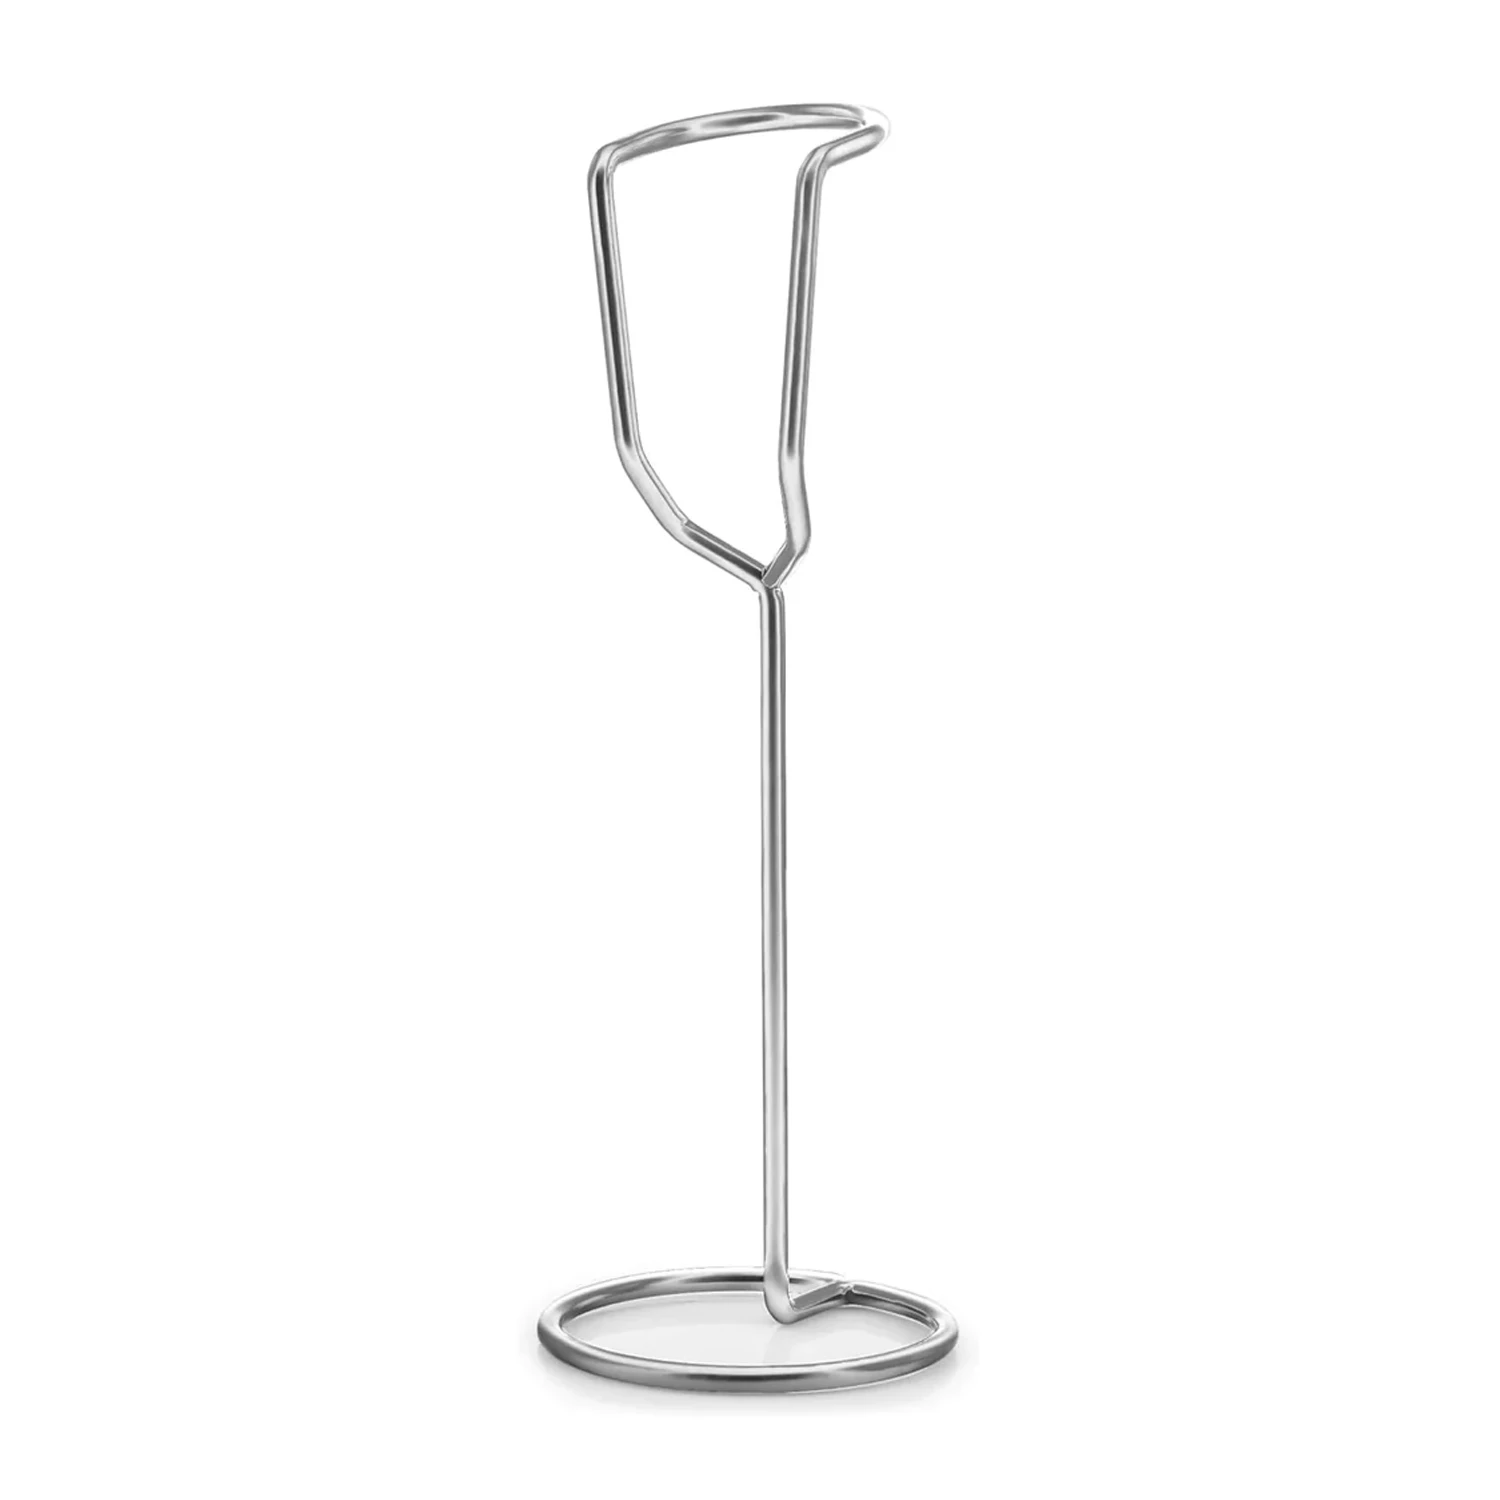 ZK Stand for Frother Ultra